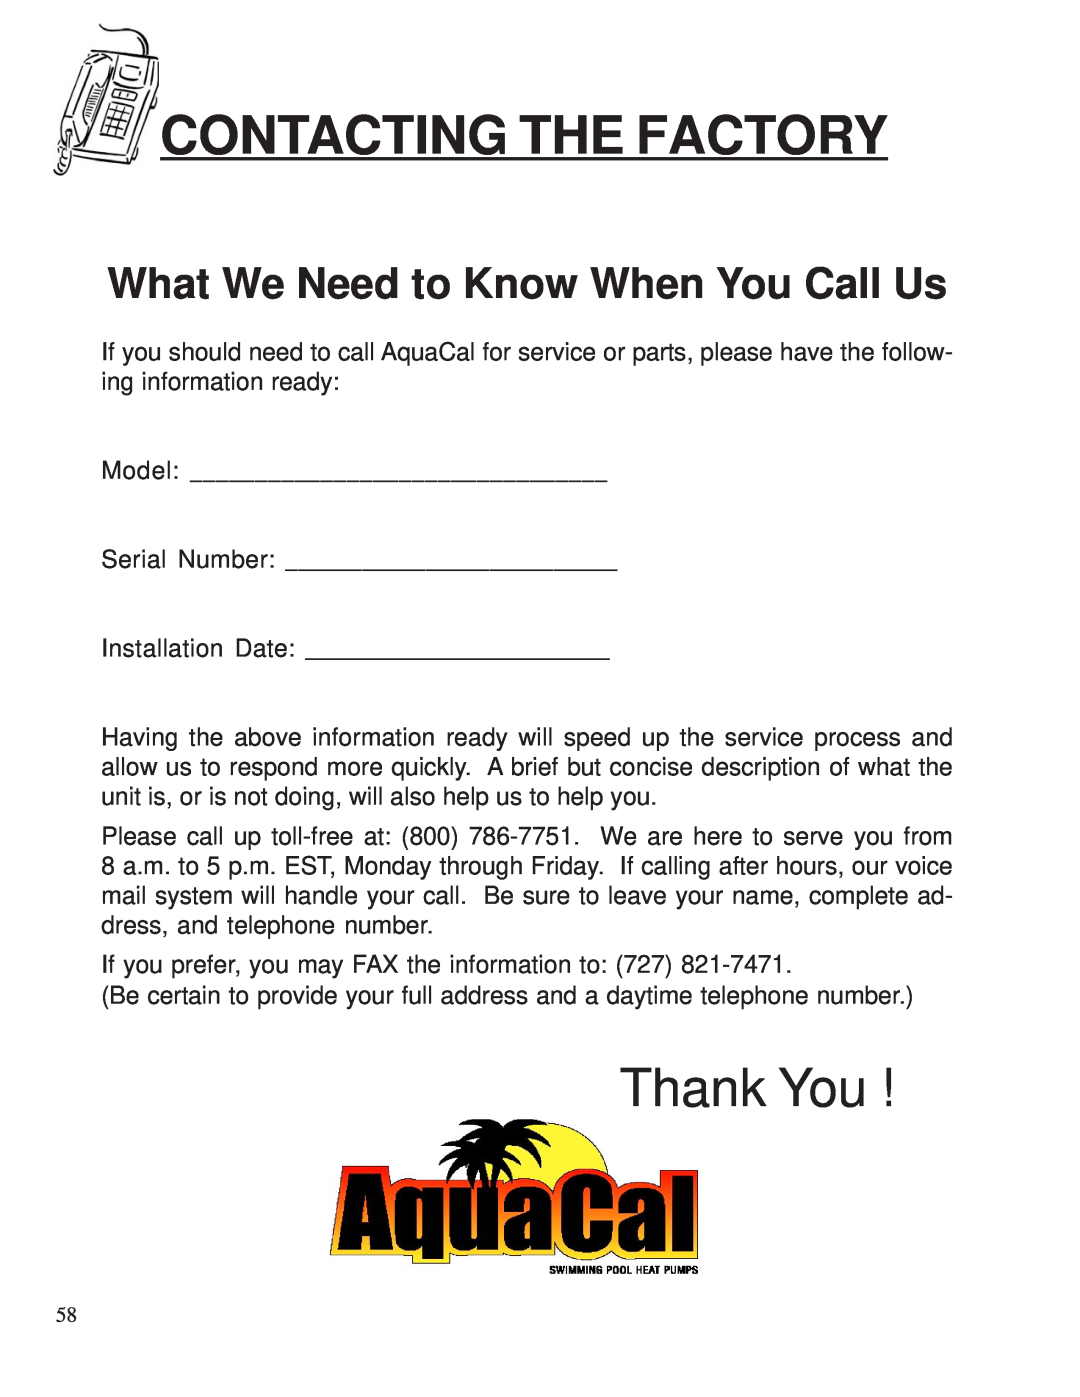 Aquacal 100 Contacting The Factory, What We Need to Know When You Call Us, Model, Serial Number, Installation Date 